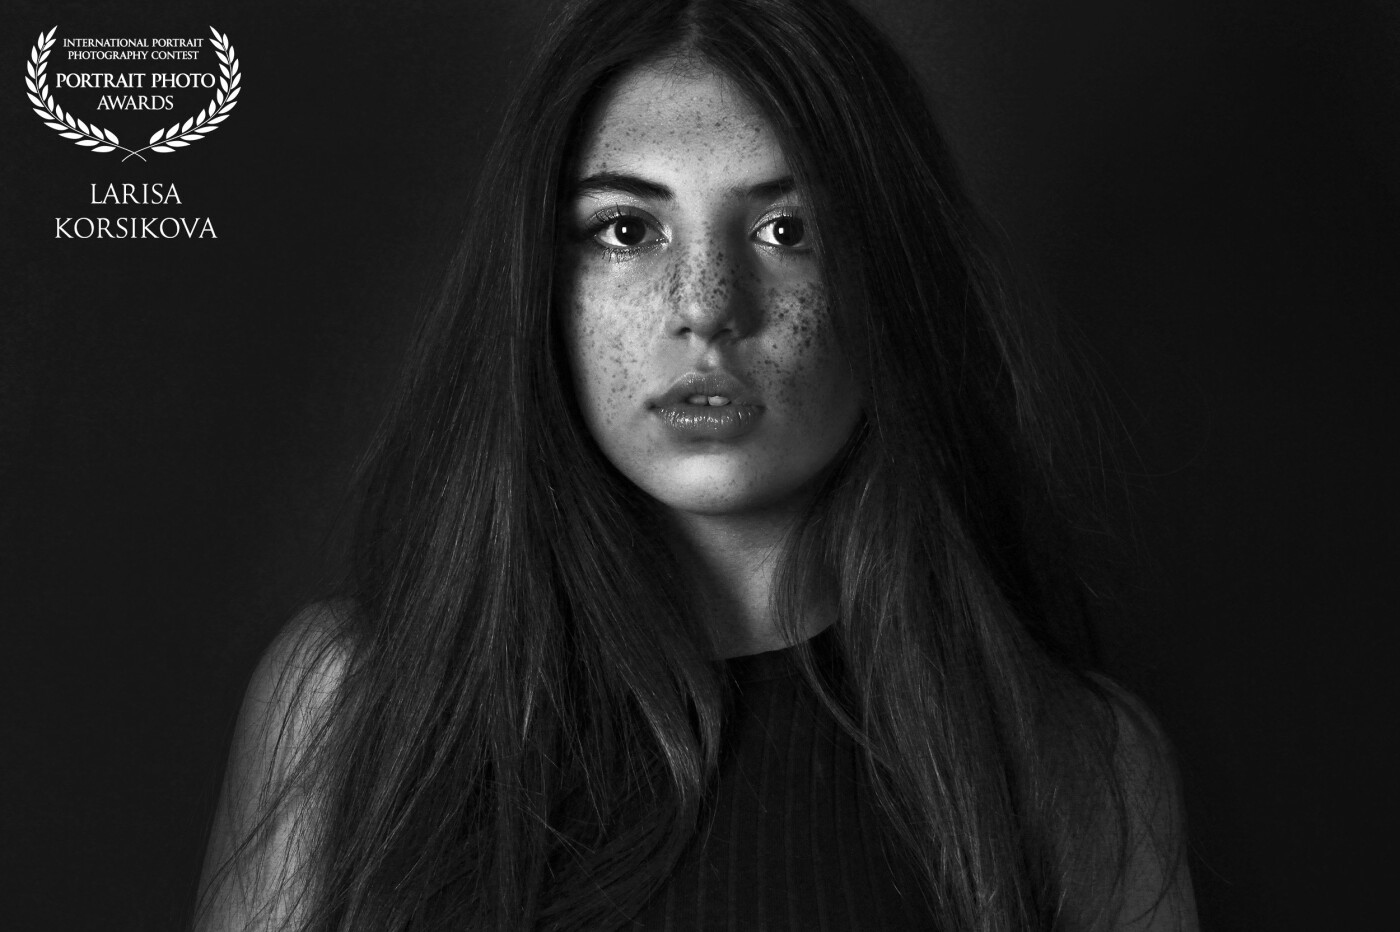 One of my favorite styles in photography - Black and White portraits of women.  My model is a beautiful young Chilean singer Sophia.